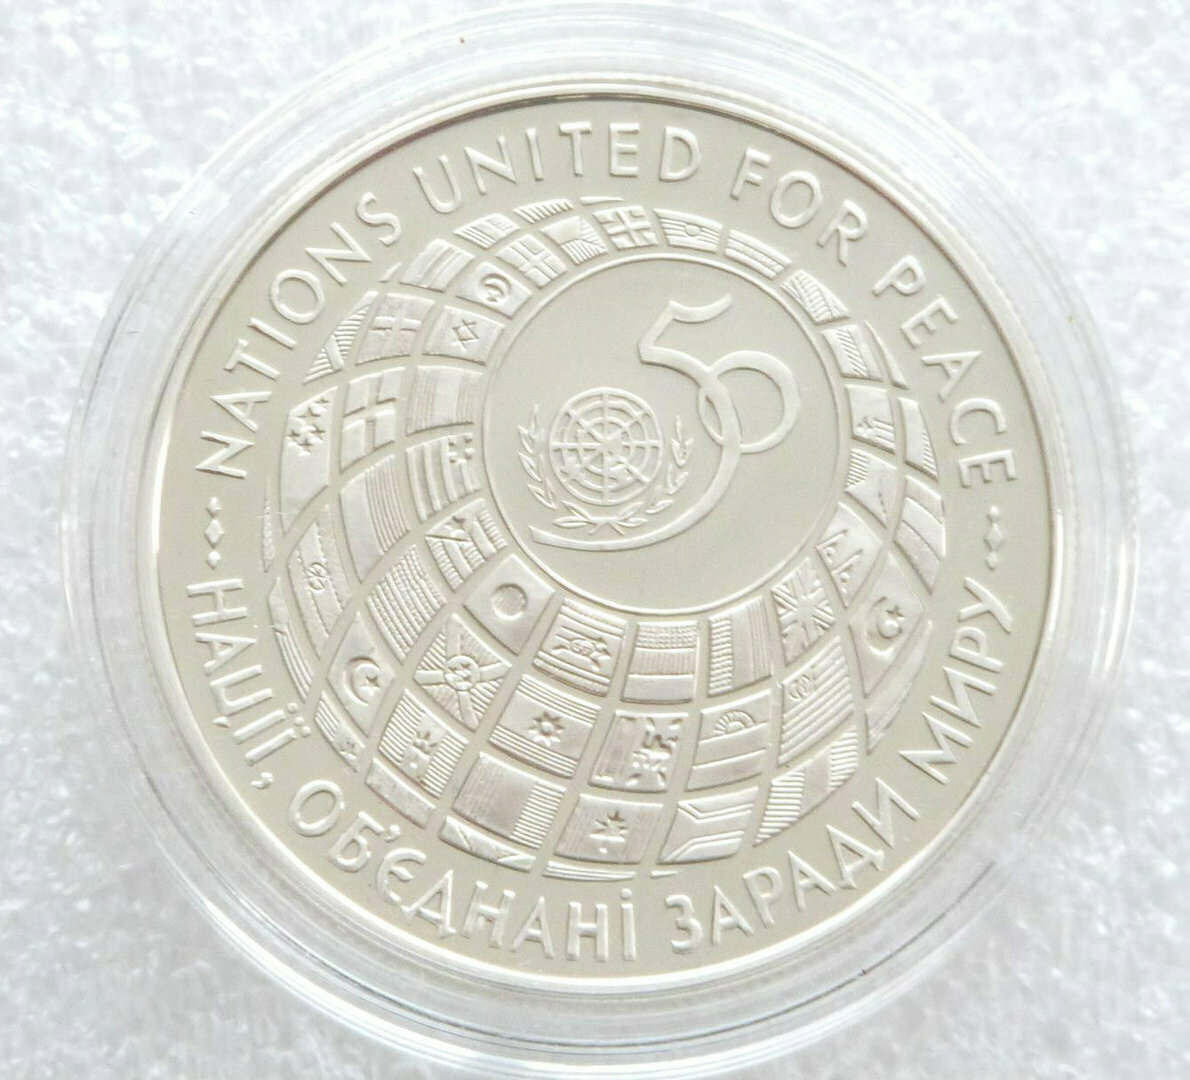 1995 Ukraine United Nations 2,000,000 Karbovanets Silver Proof 1oz Coin